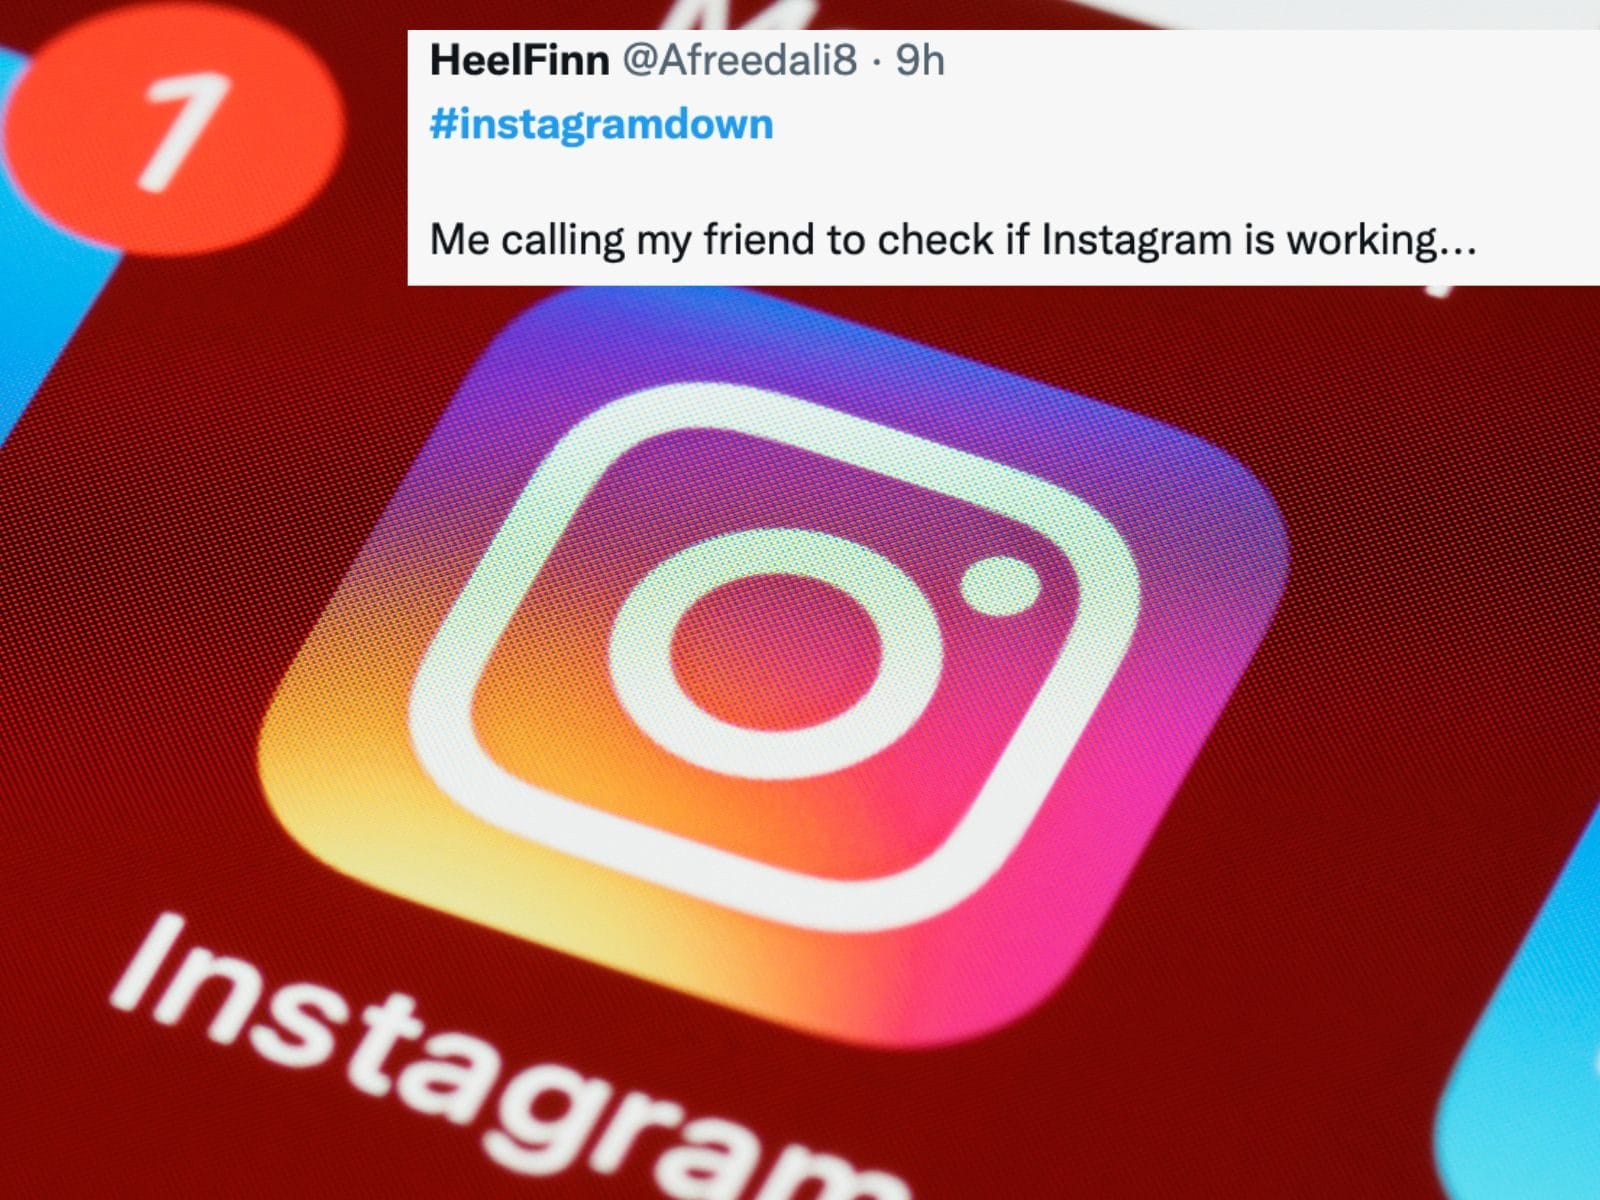 Instagram Down Memes Flood Twitter as Photo Sharing App Suffers Brief  Outage - News18